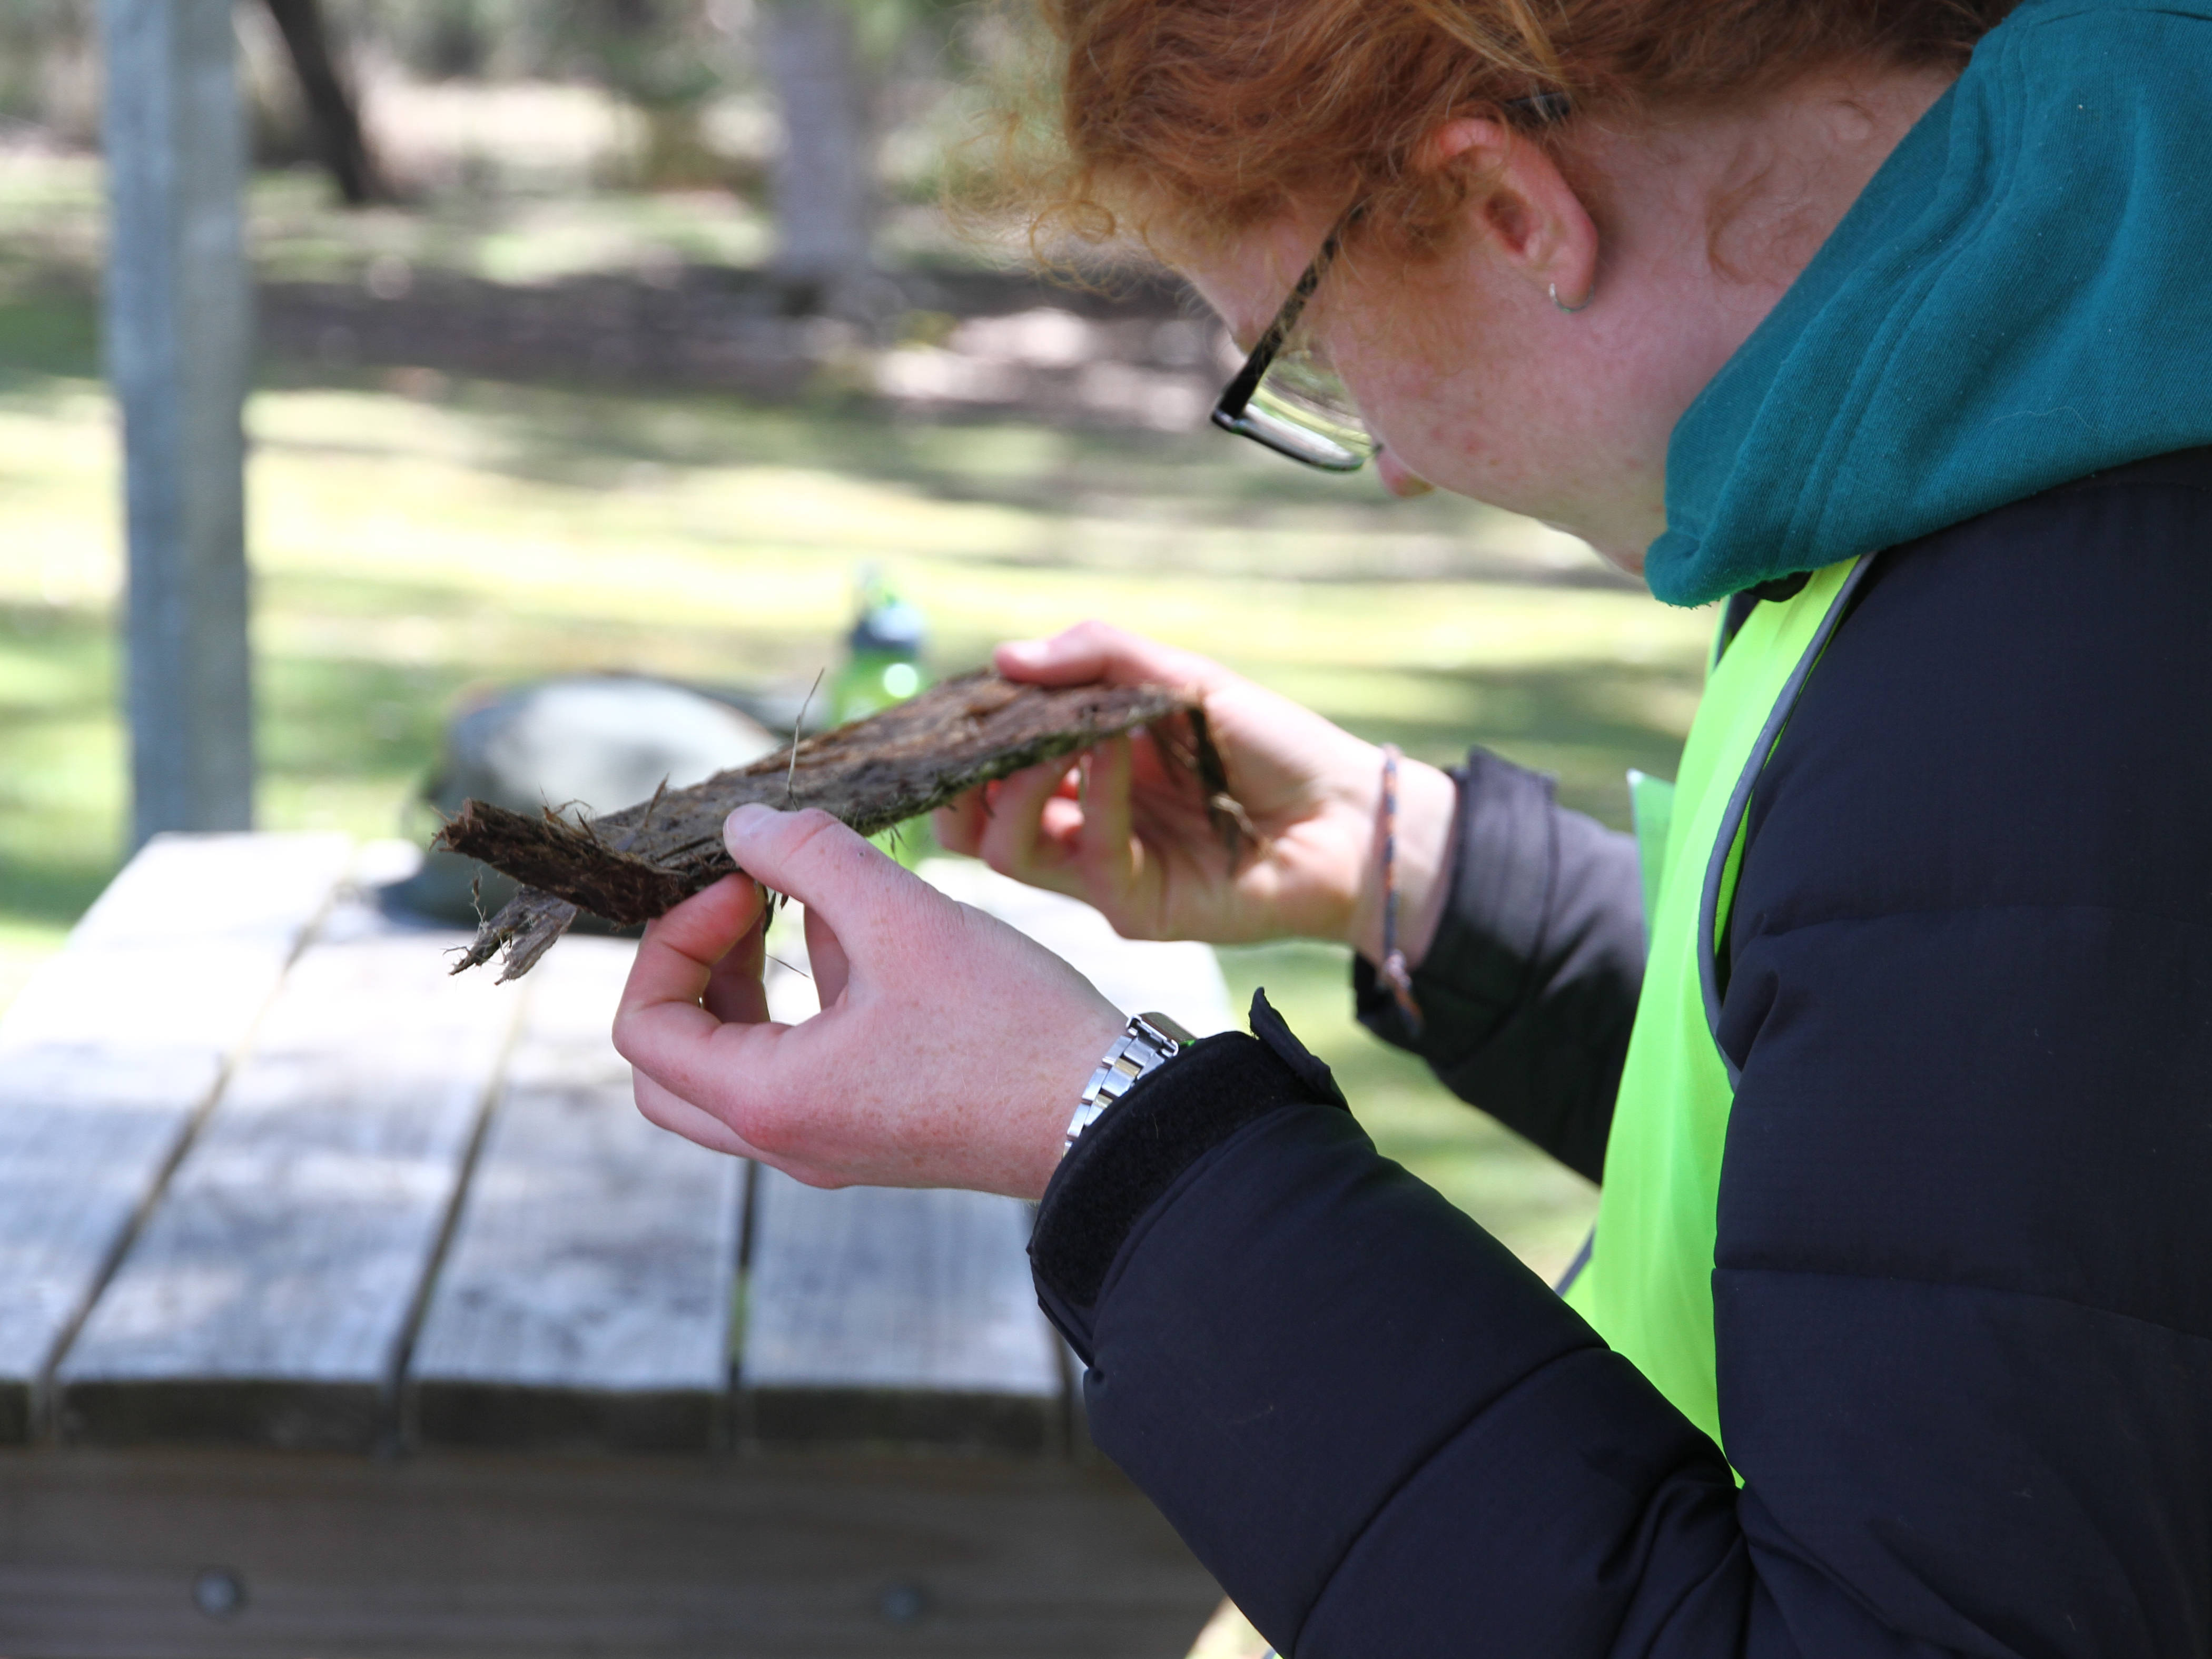 School student looking intently at a piece of bark. The student has red hair and glasses and is wearing a hoodie with a green high-vis vest. They are holding a dark brown piece of tree bark.